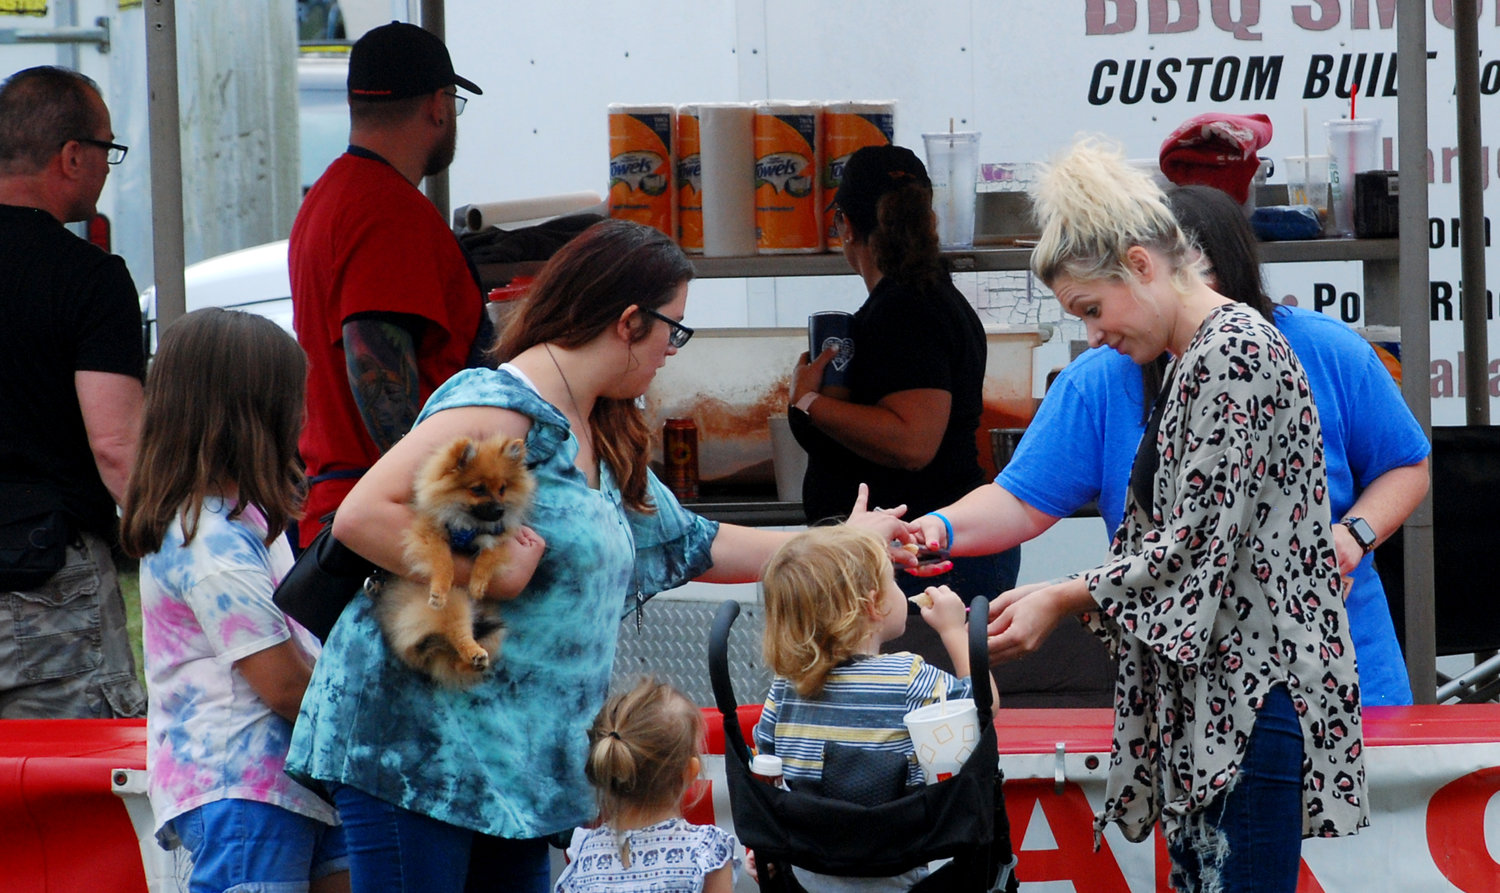 EVERYONE AND THE DOG — A group of ladies and a dog taste test some barbecue at the Ozark Utopia Club’s 47th Annual Ozark Arts and Crafts Show at Finley River Park on Oct. 1.